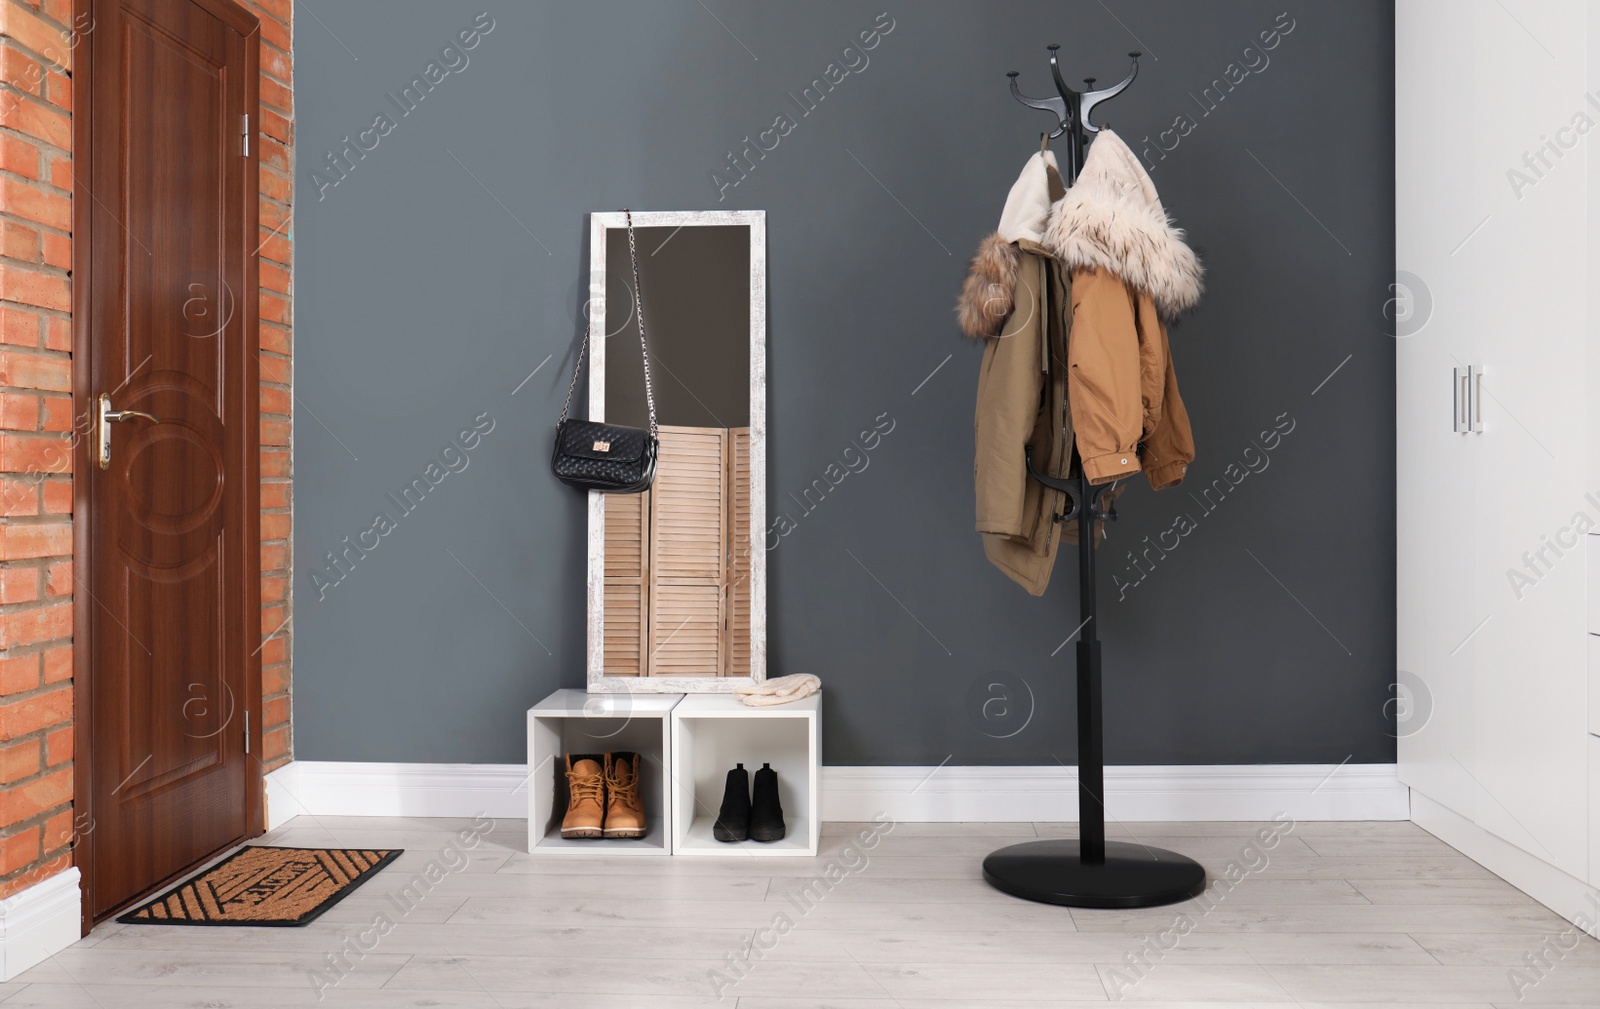 Photo of Modern hallway interior with mirror and clothes on hanger stand